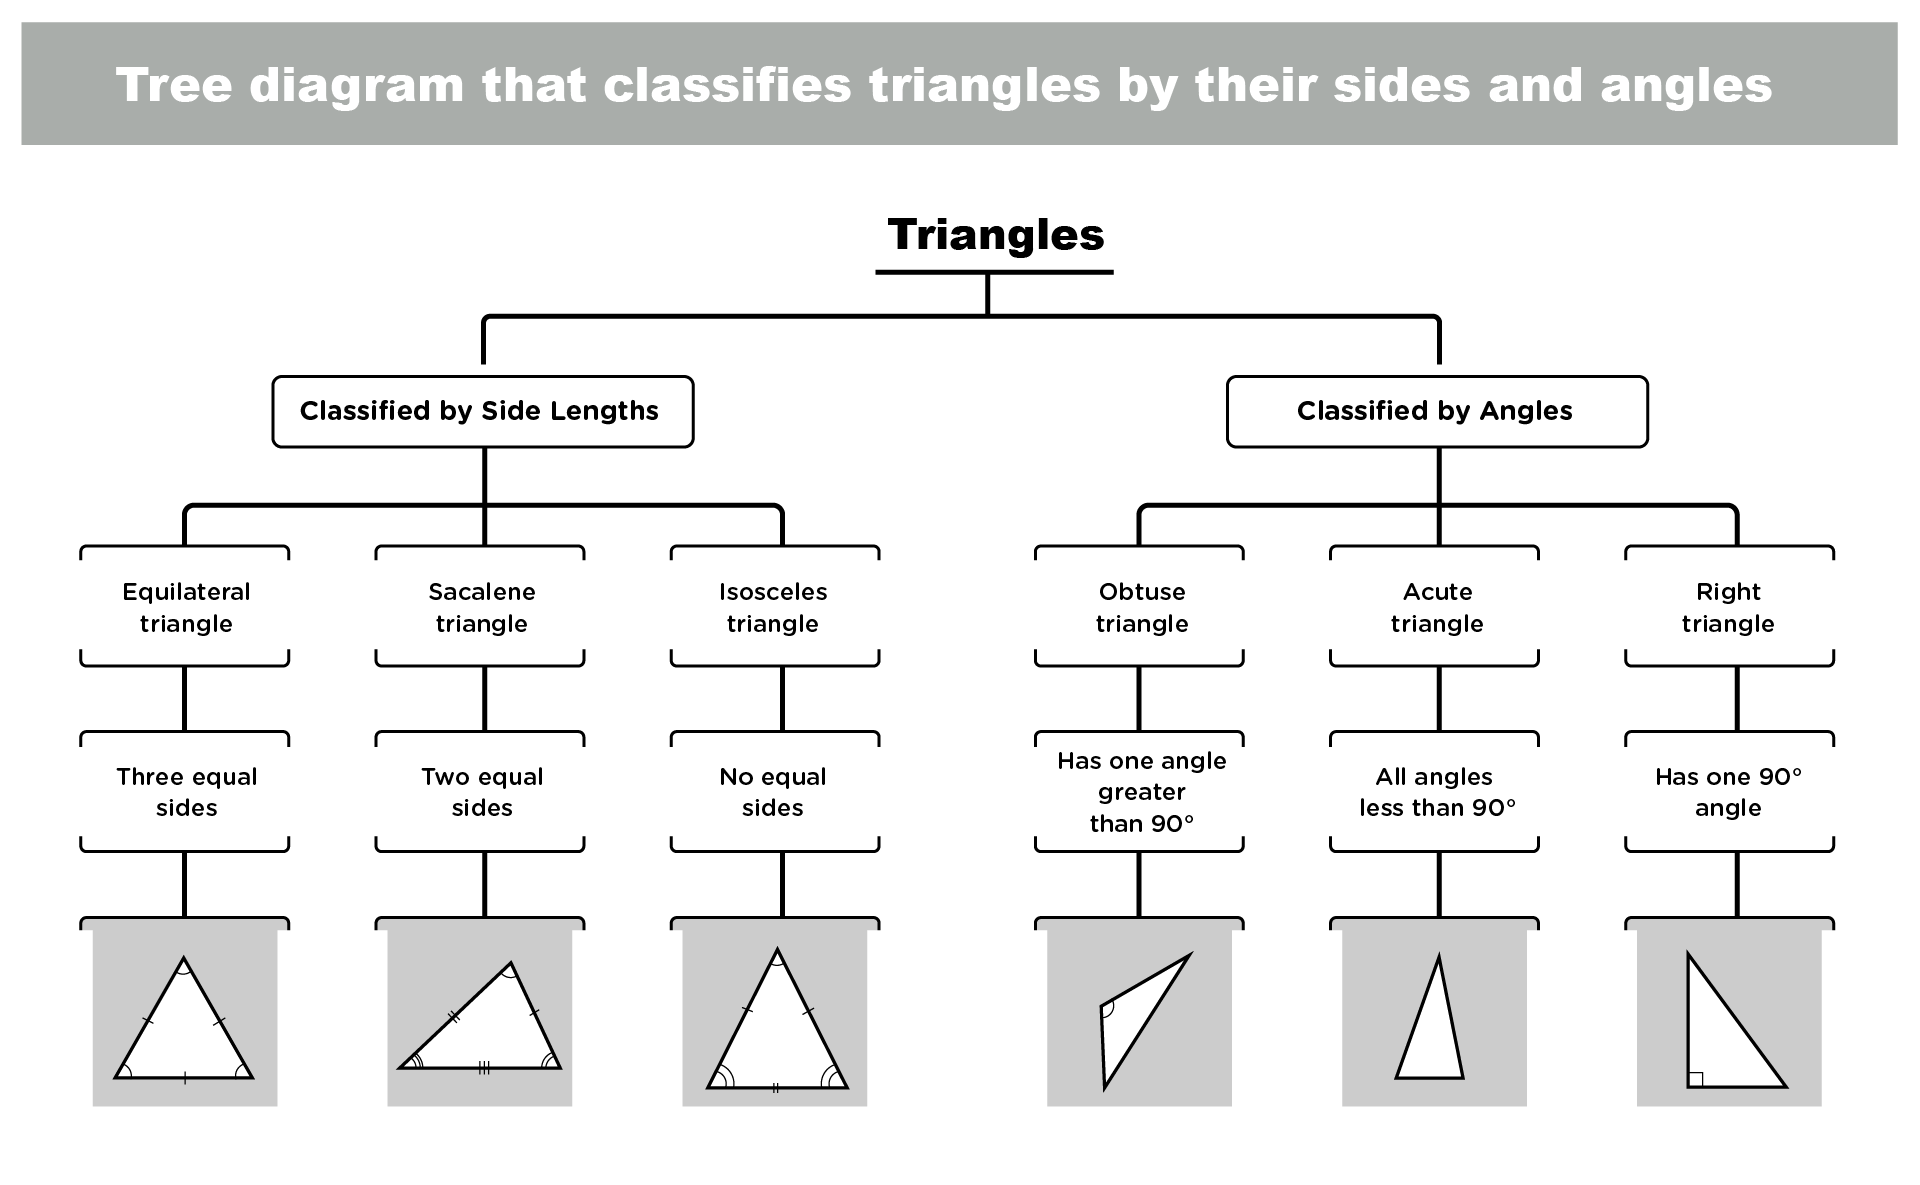 image of a tree diagram that classifies triangles by their sides and angles